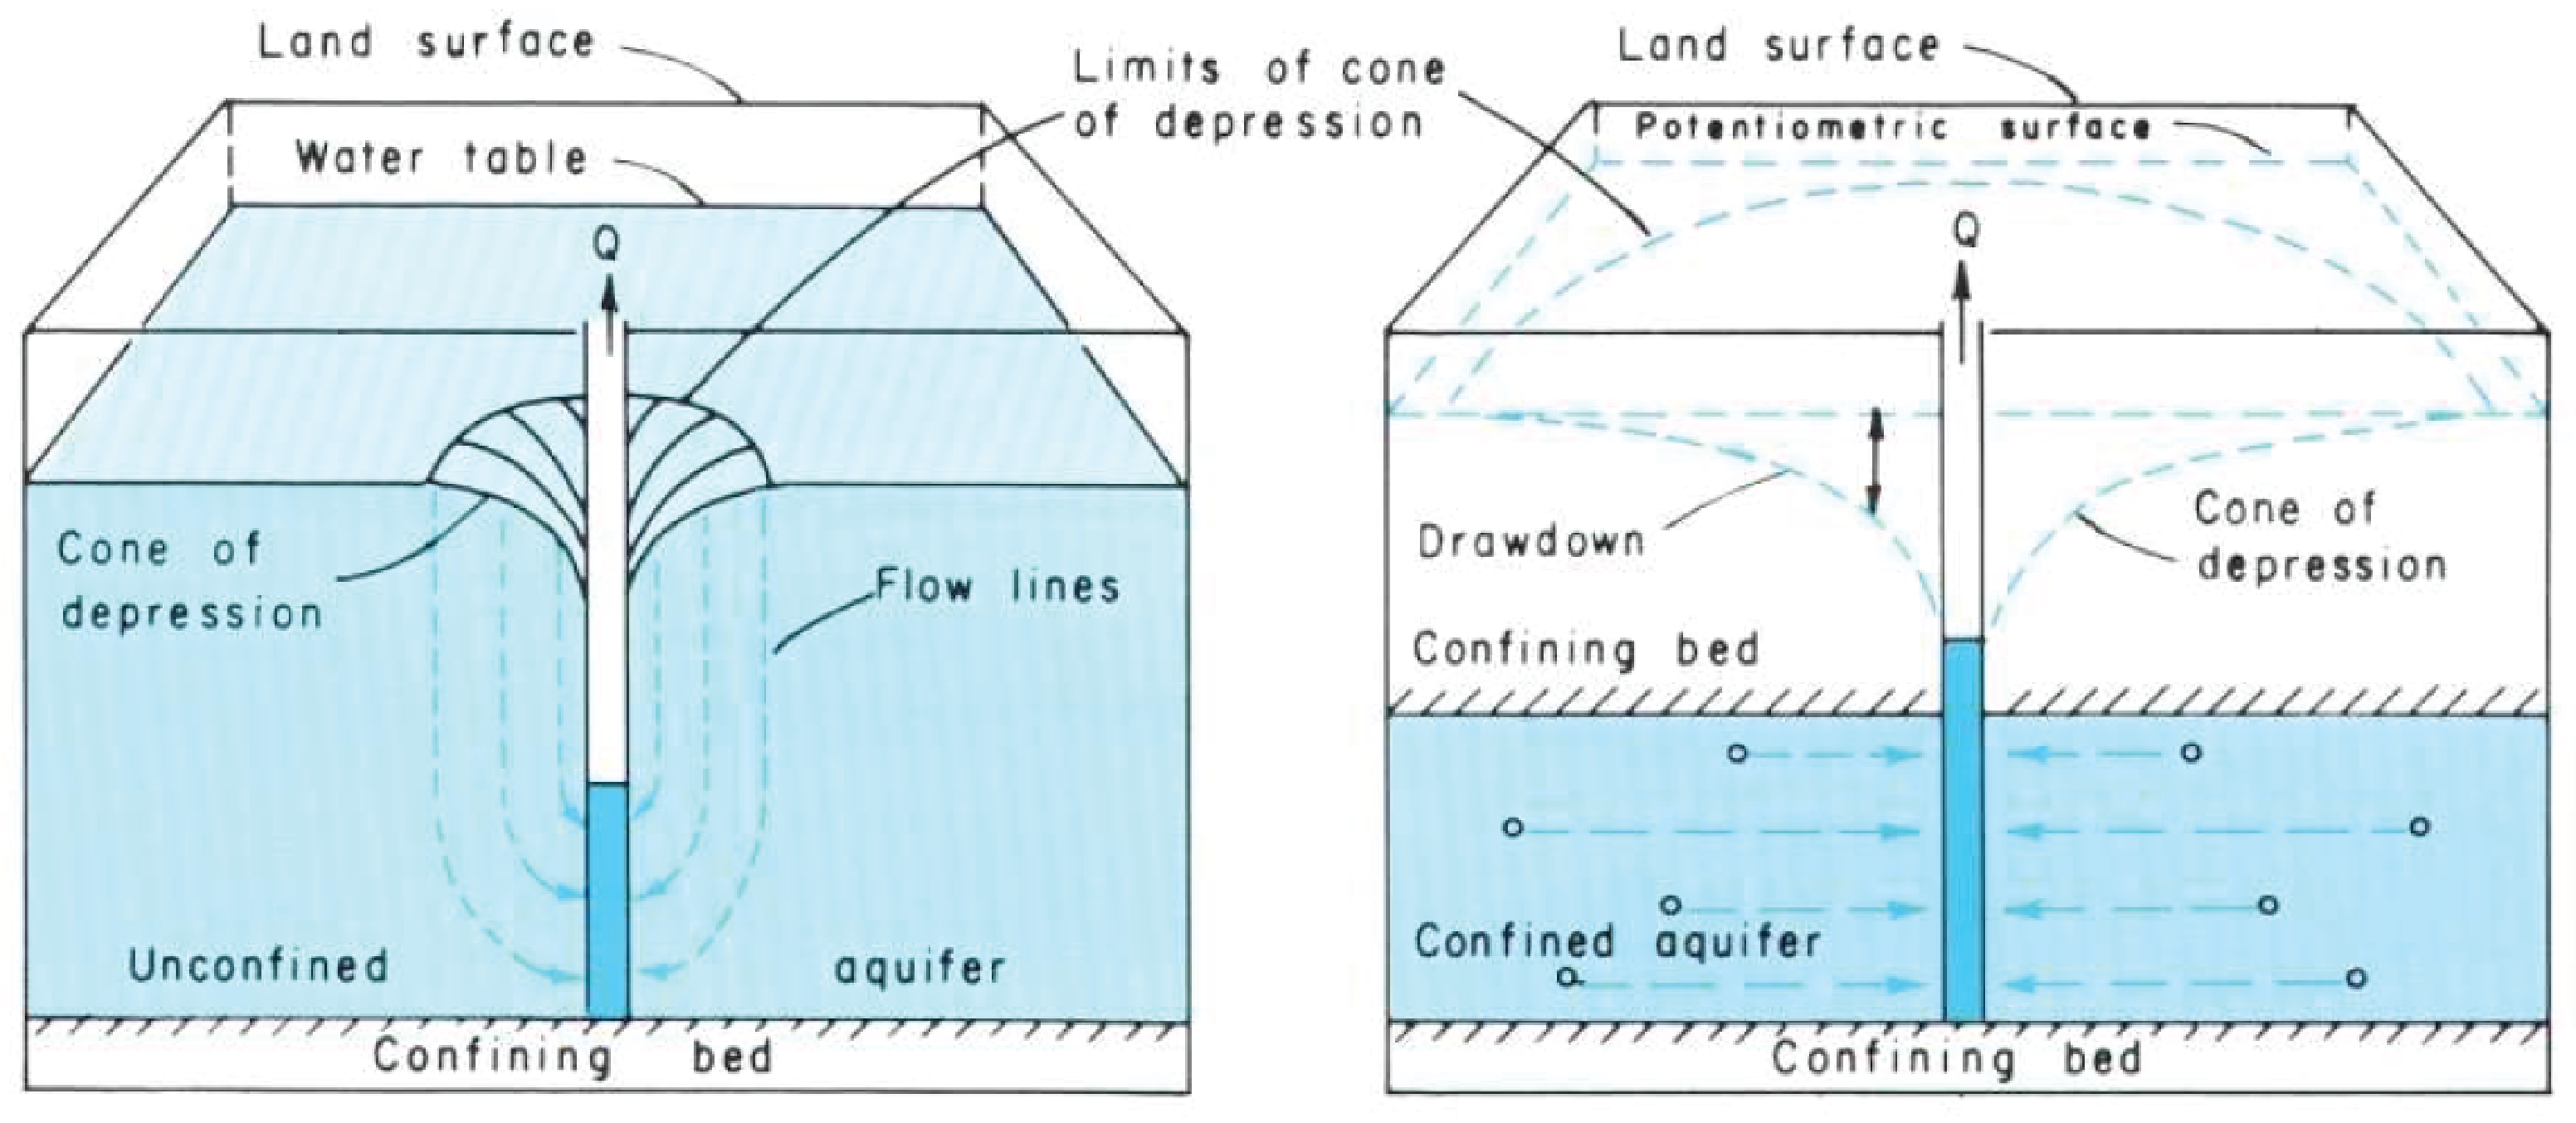 The shape of the potentiometric surface or water table around a pumping well is cone-shaped, where groundwater level has the greatest drawdown near the well.